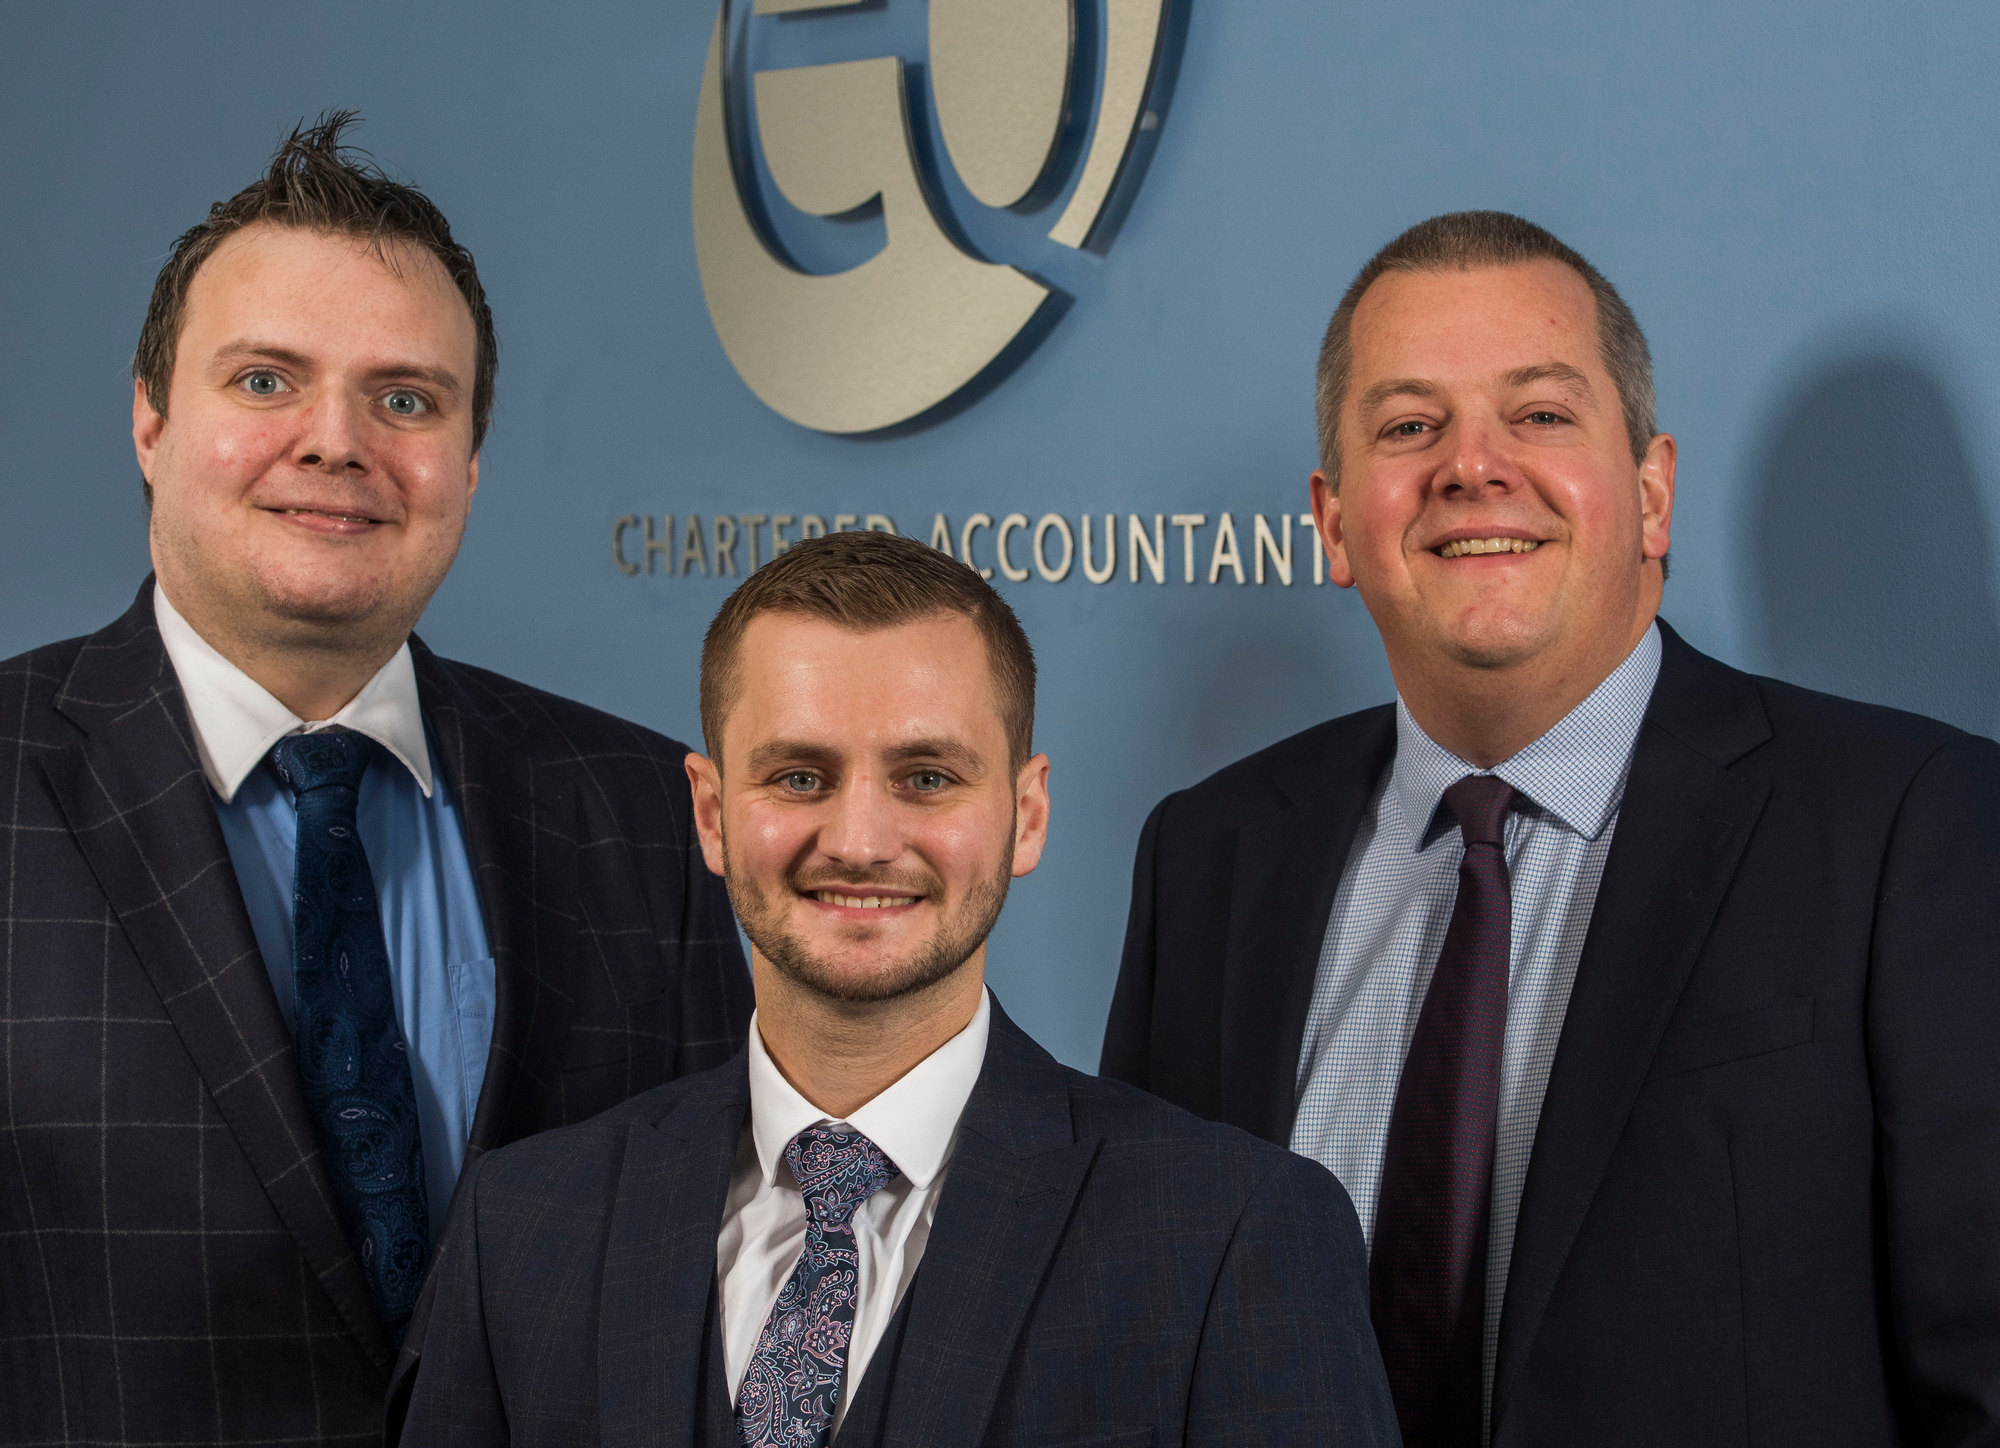 Tax manager Ben Connolly appointed at EQ Accountants